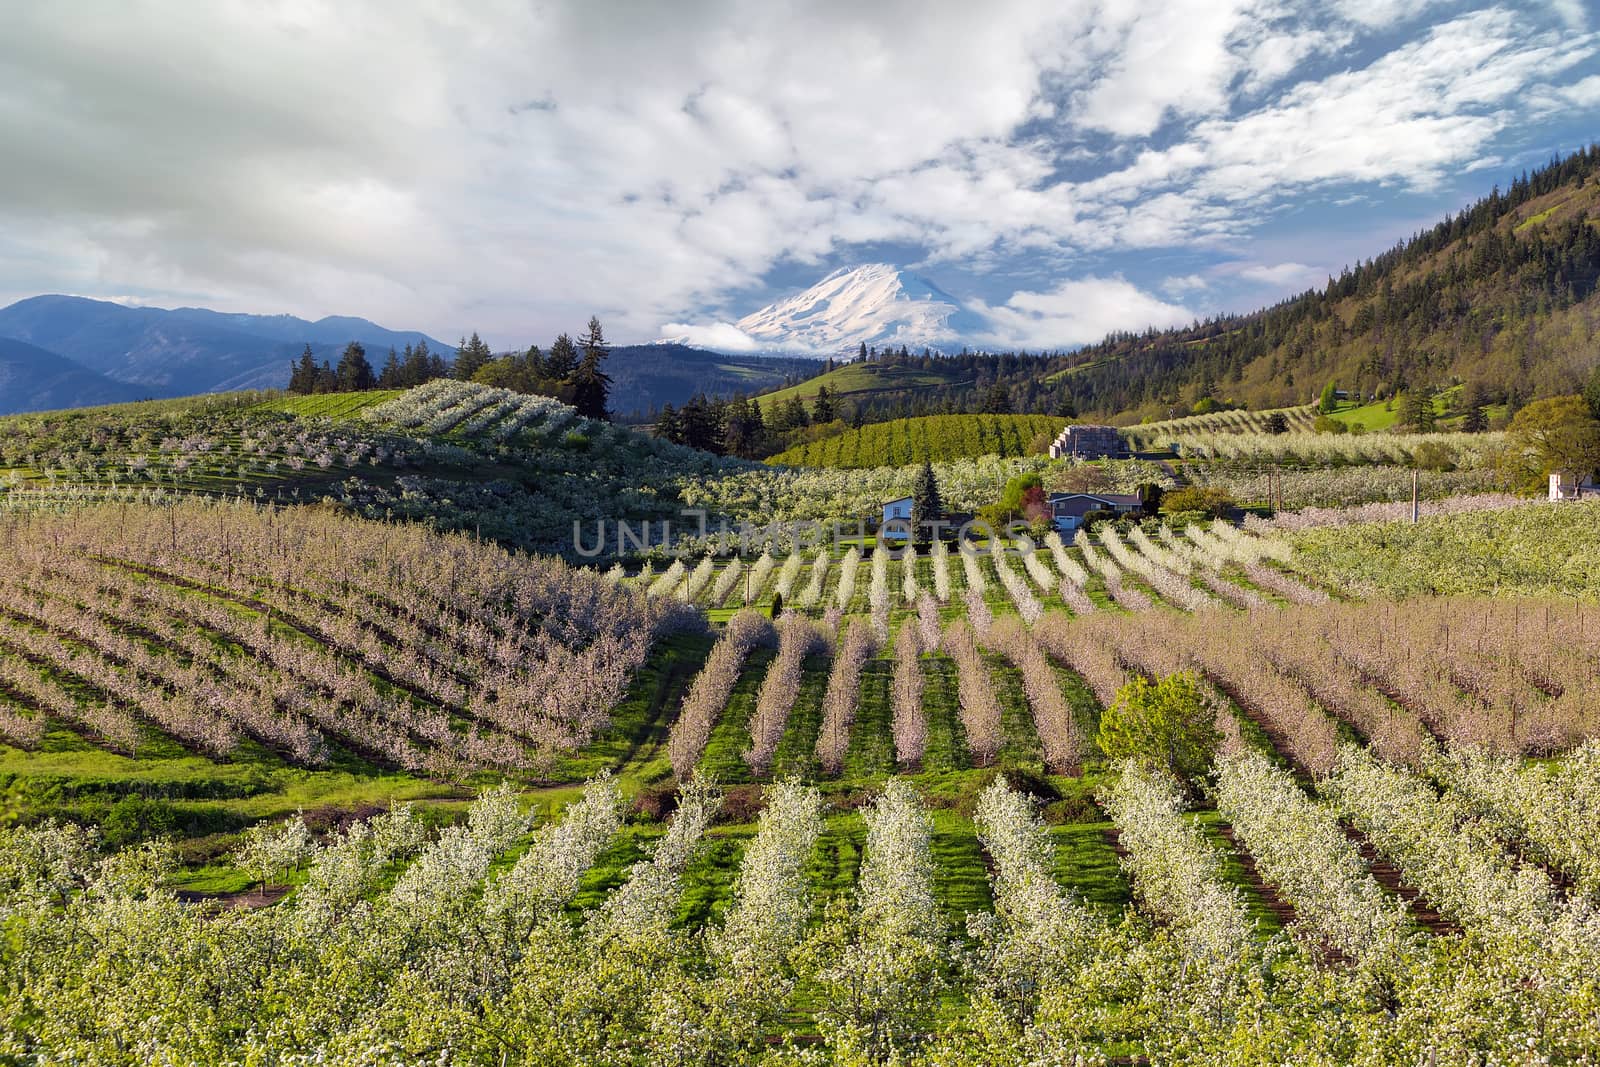 Hood River Pear Orchards on a Cloudy Day by Davidgn